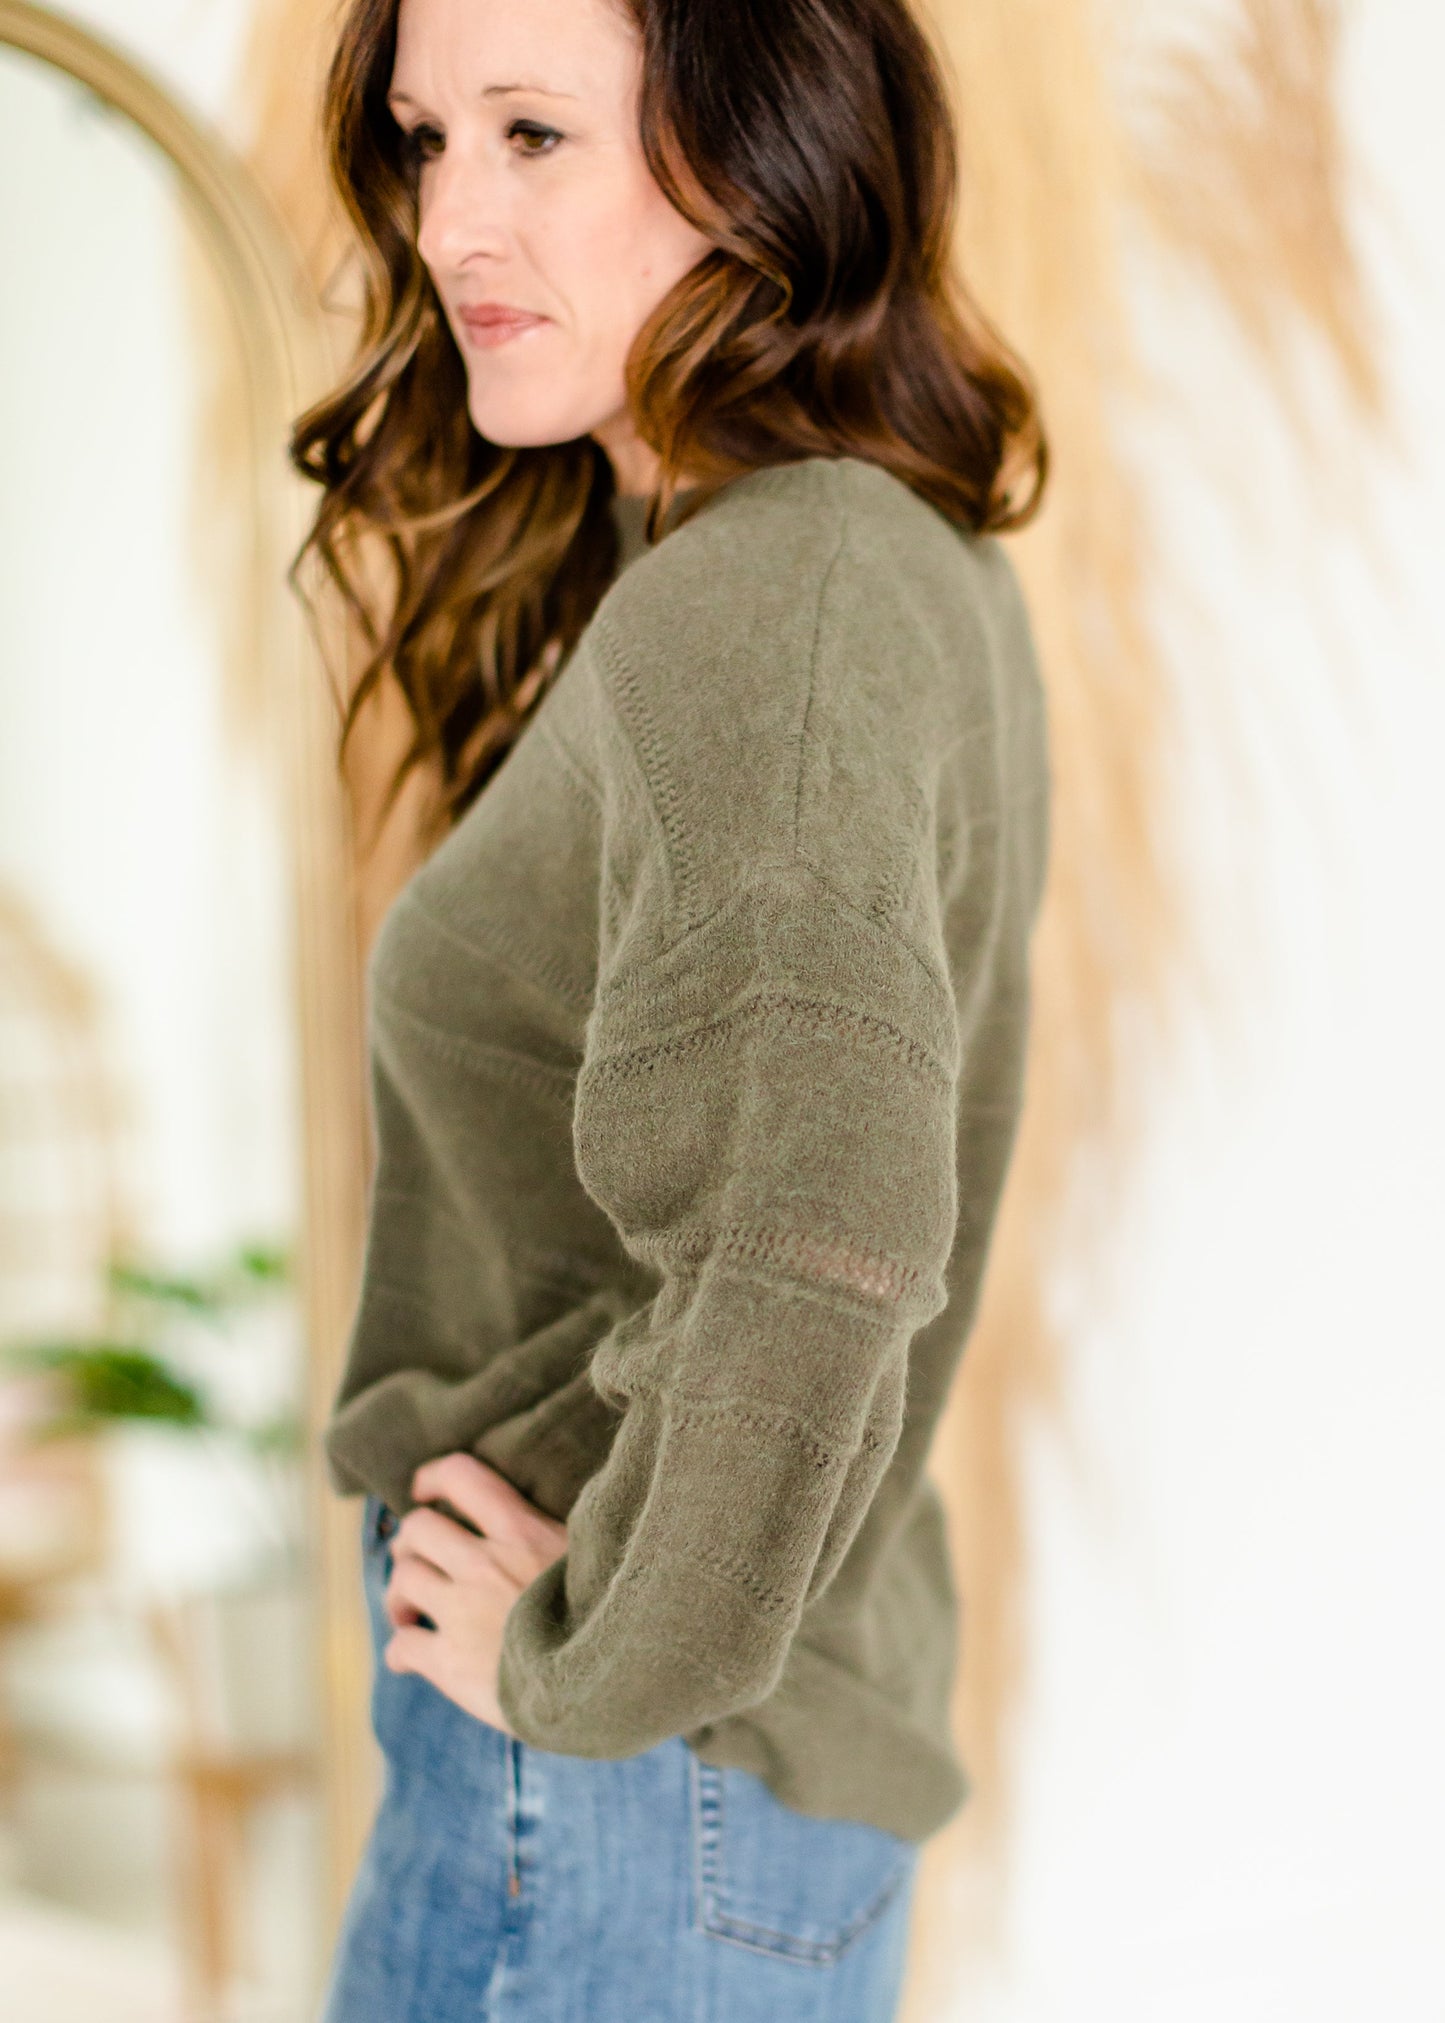 Olive Green Textured Crewneck Sweater - FINAL SALE Tops